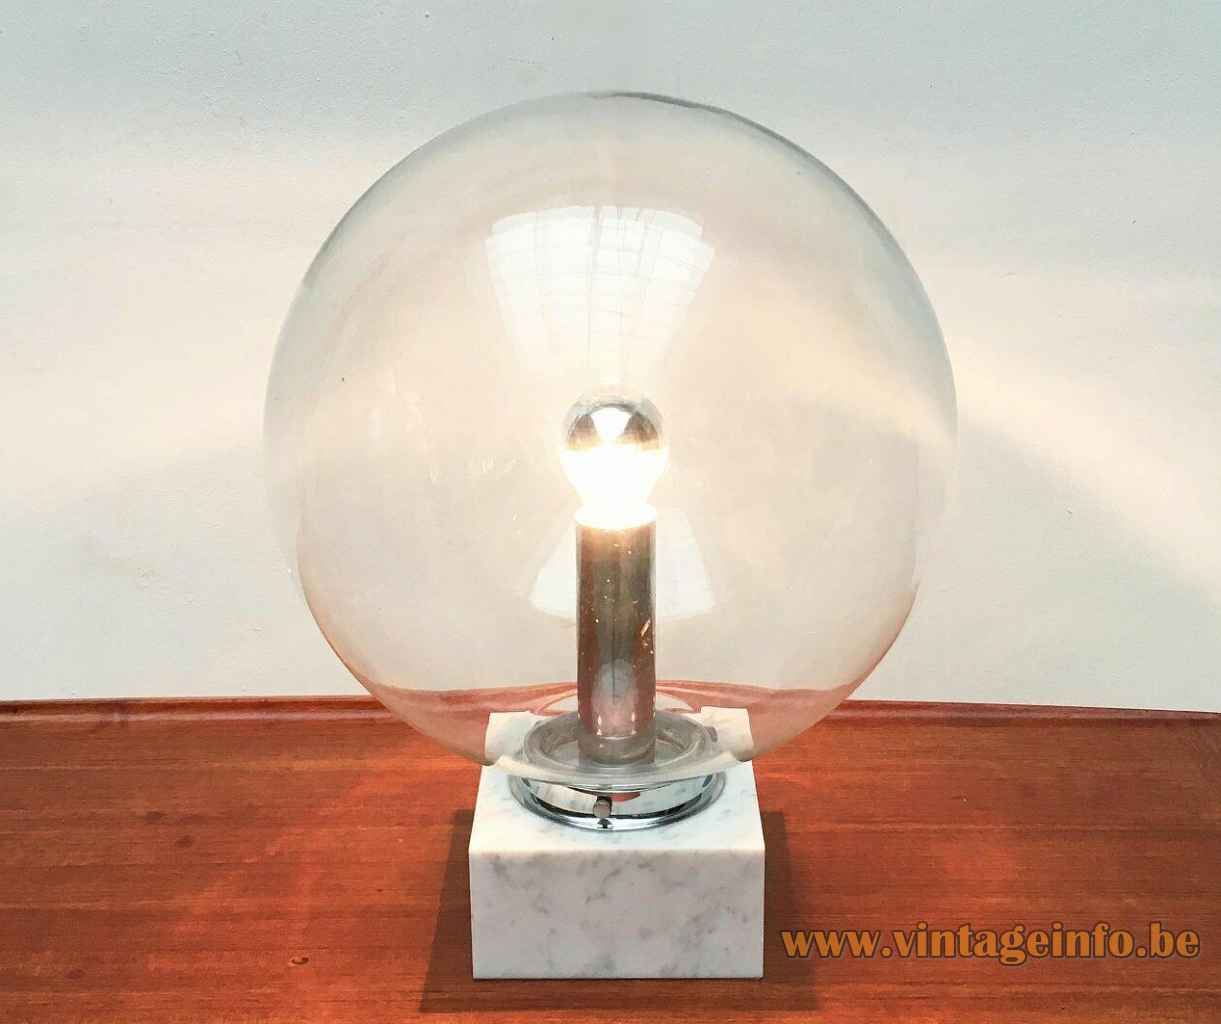 ERCO globe table lamp 3480 square marble base clear glass lampshade chrome tube 1970s Germany